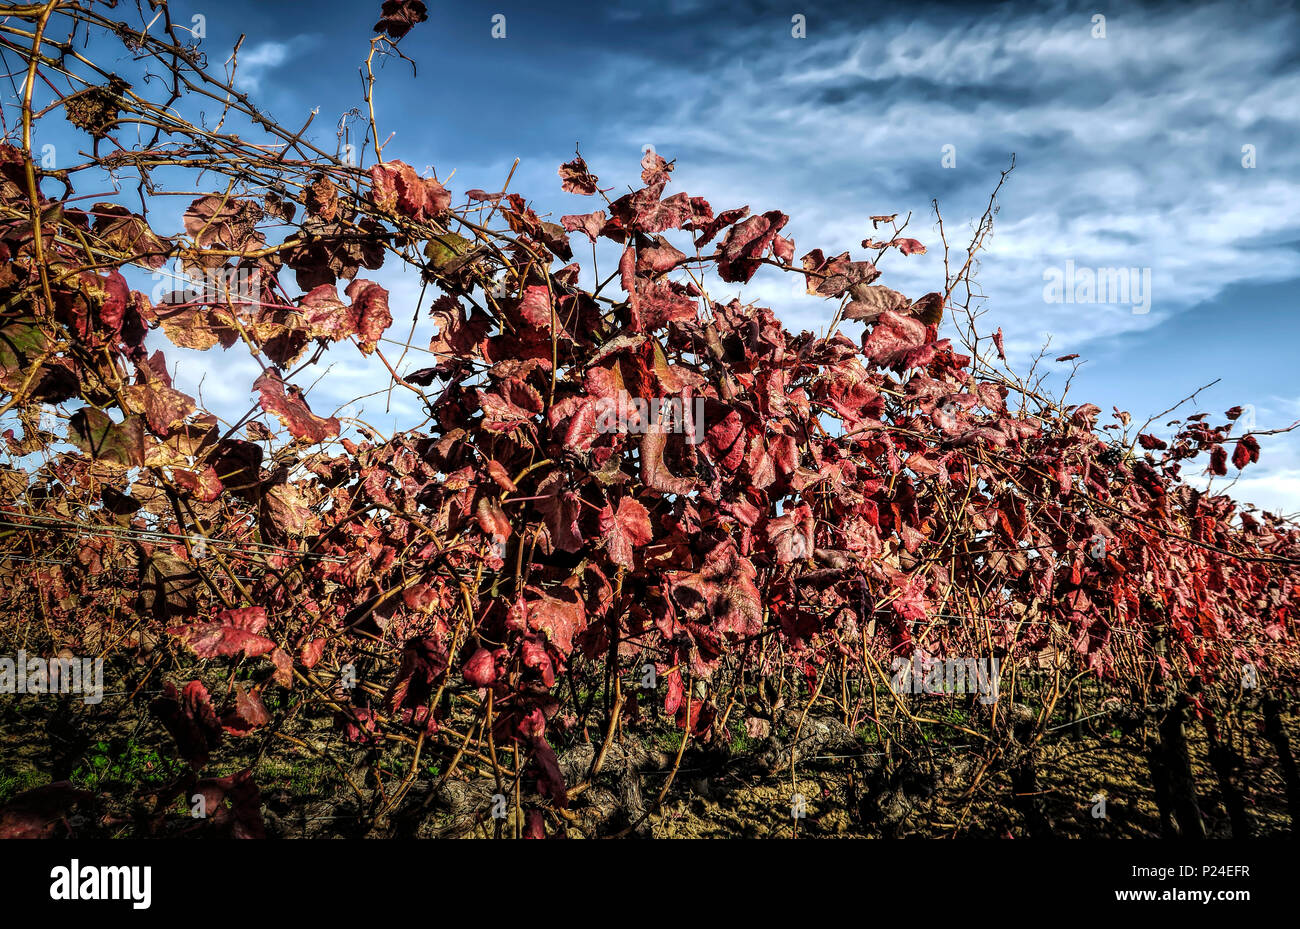 Vines with red leaves in autumn Stock Photo